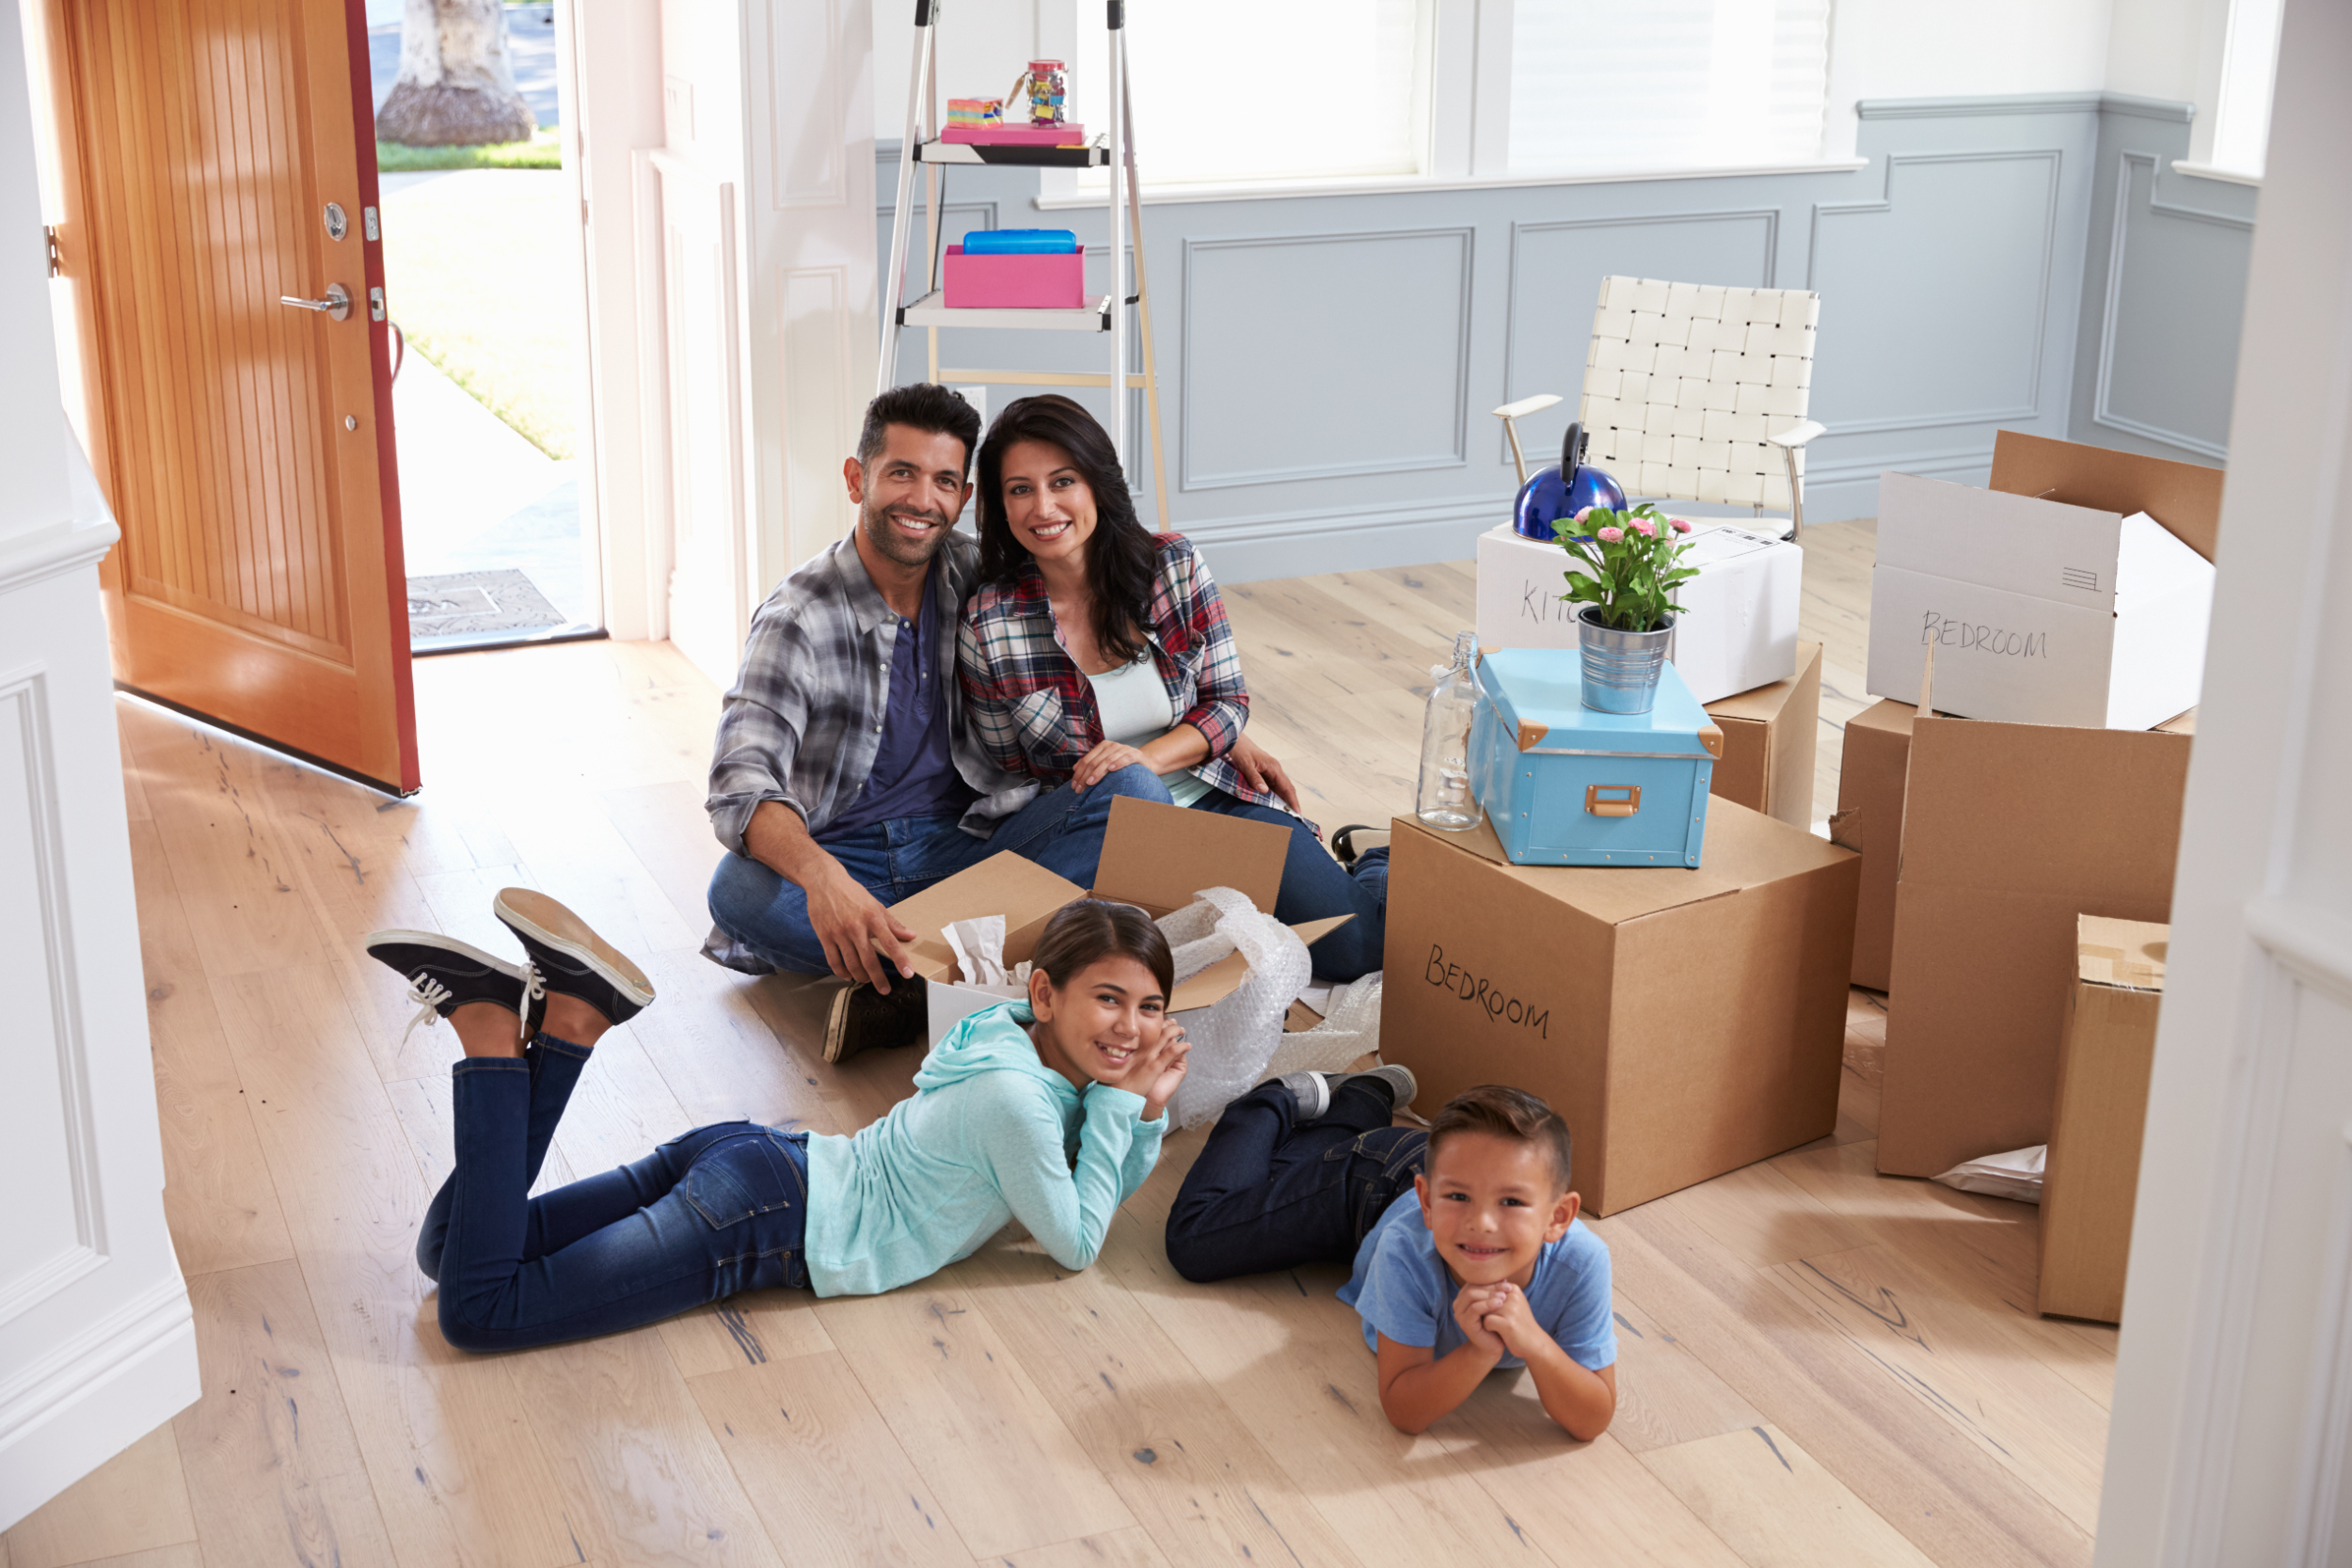 A young family smiling with moving boxes in a new home